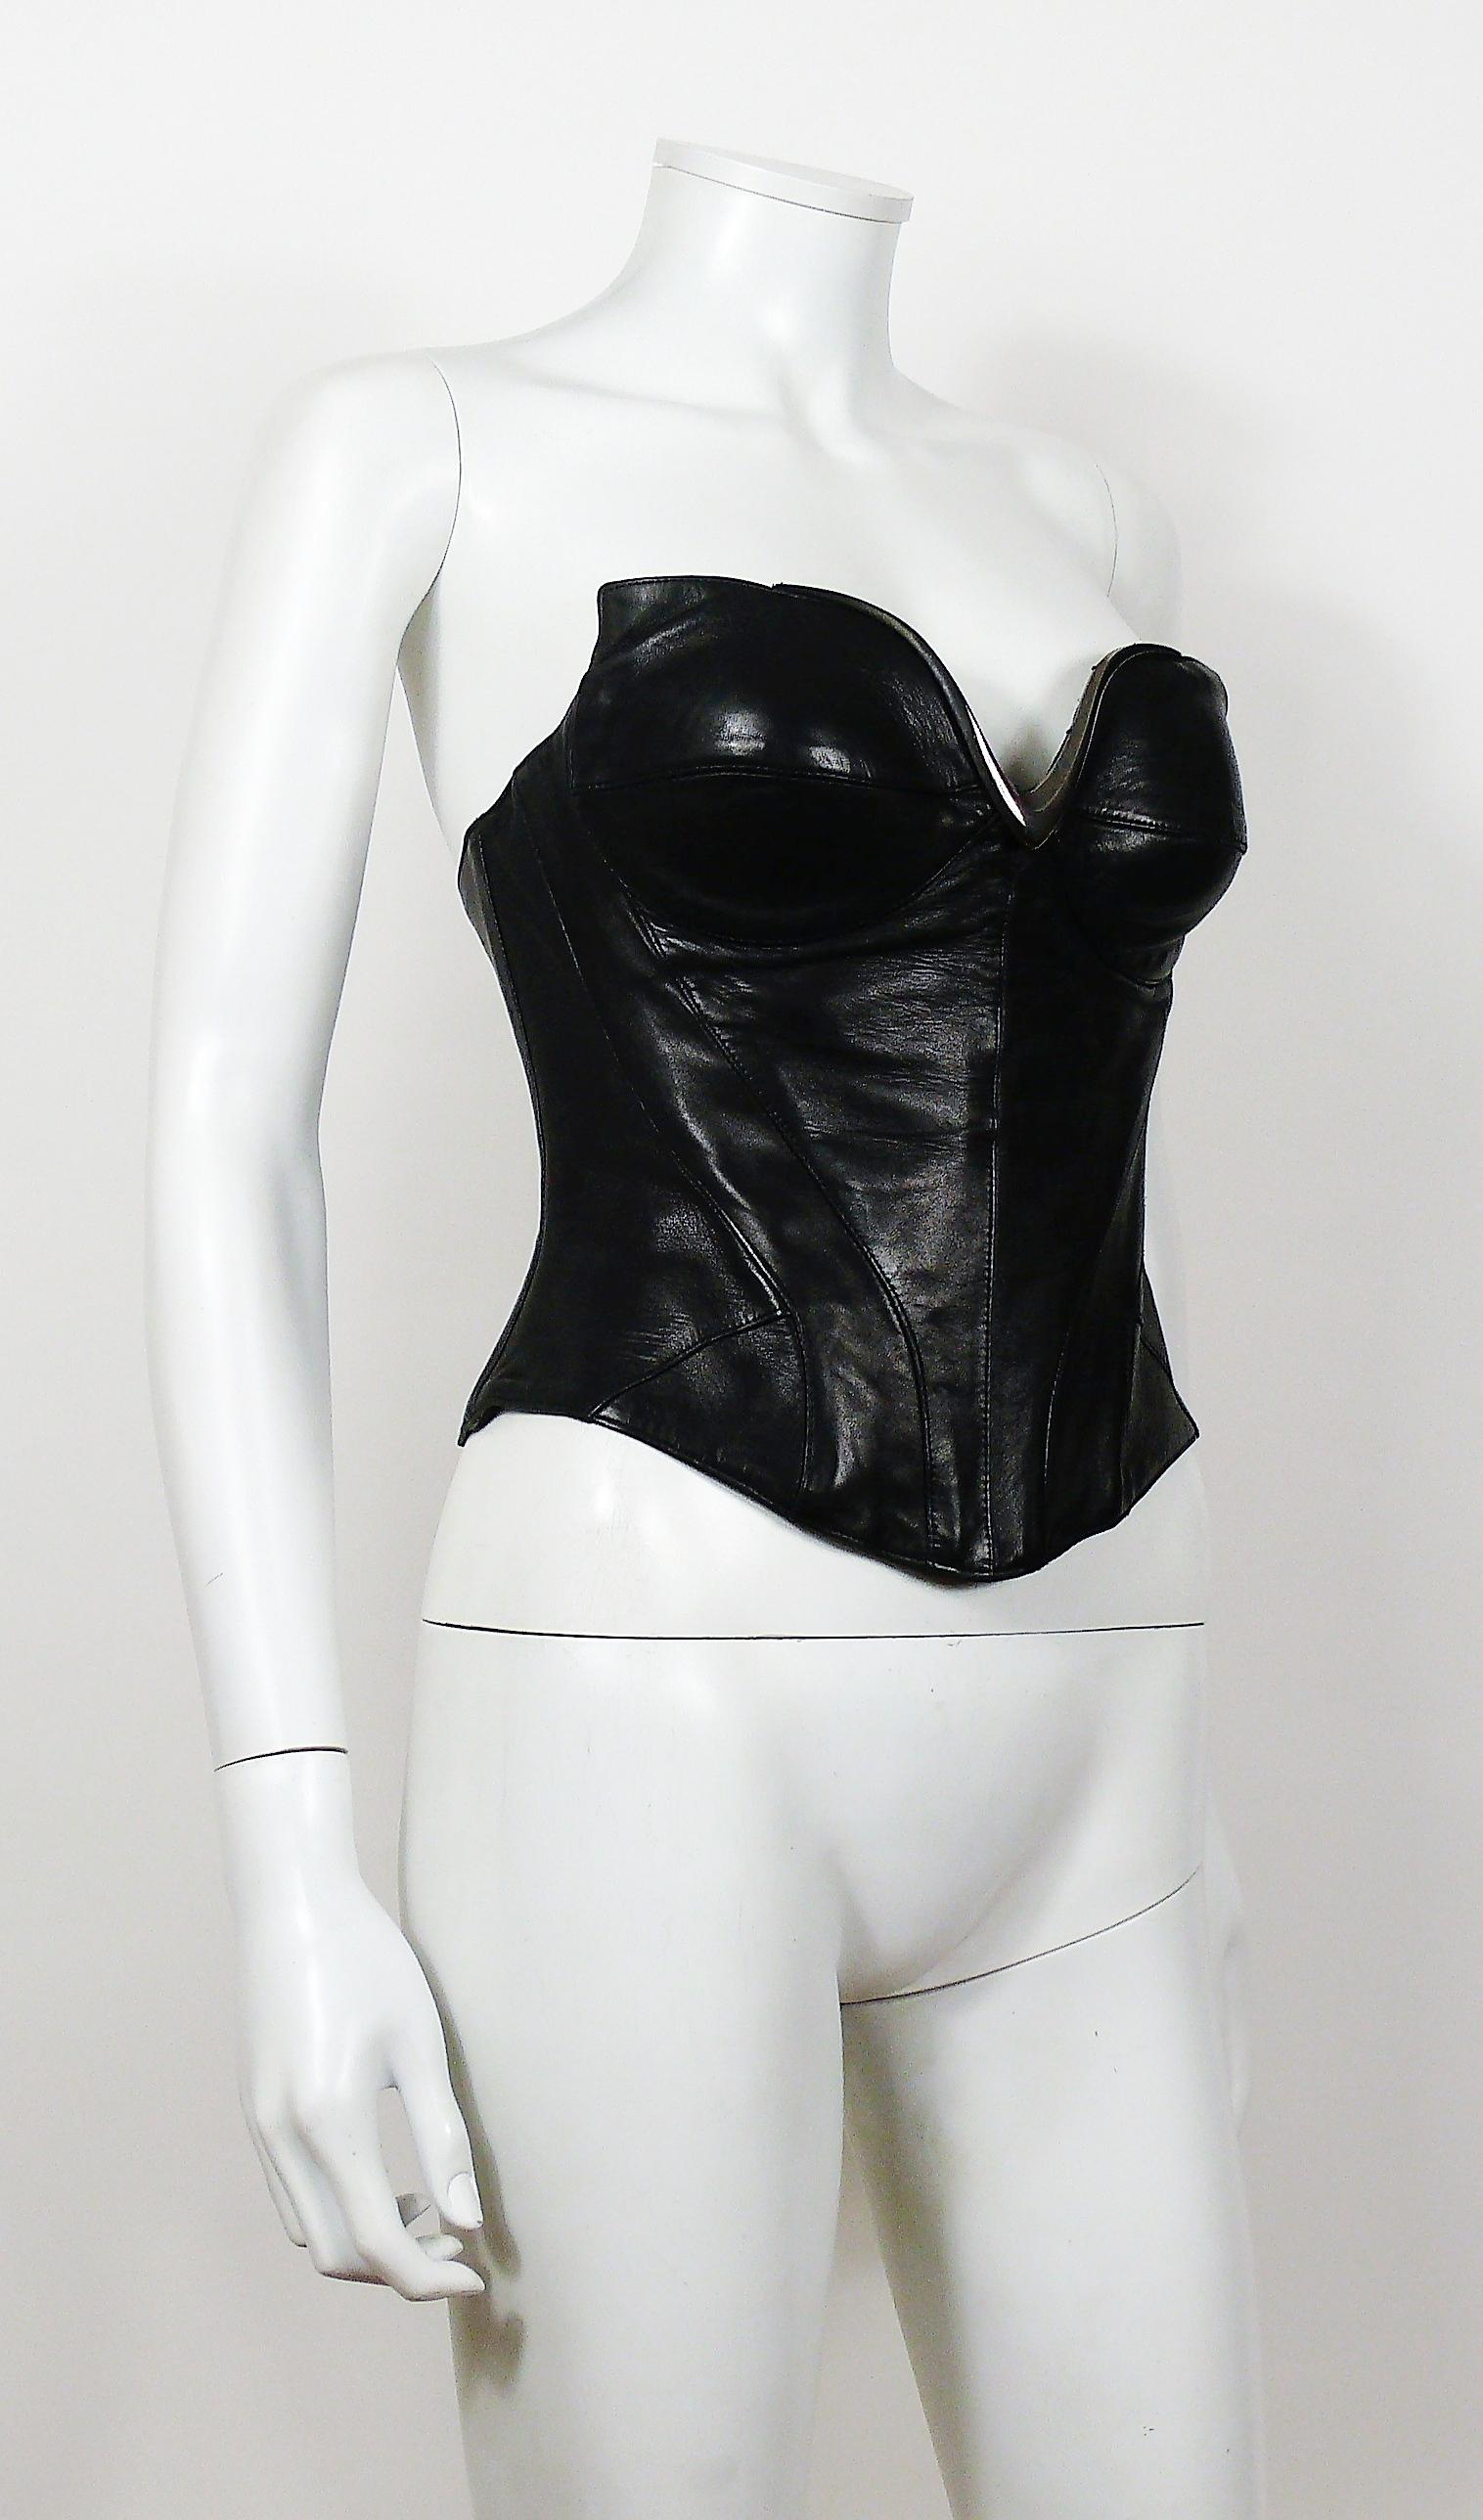 THIERRY MUGLER COUTURE iconic vintage black leather bustier corset.

This bustier features :
- Typical THIERRY MUGLER's cut.
- Black lambskin leather body.
- Gun patina metal V at center bust.
- 